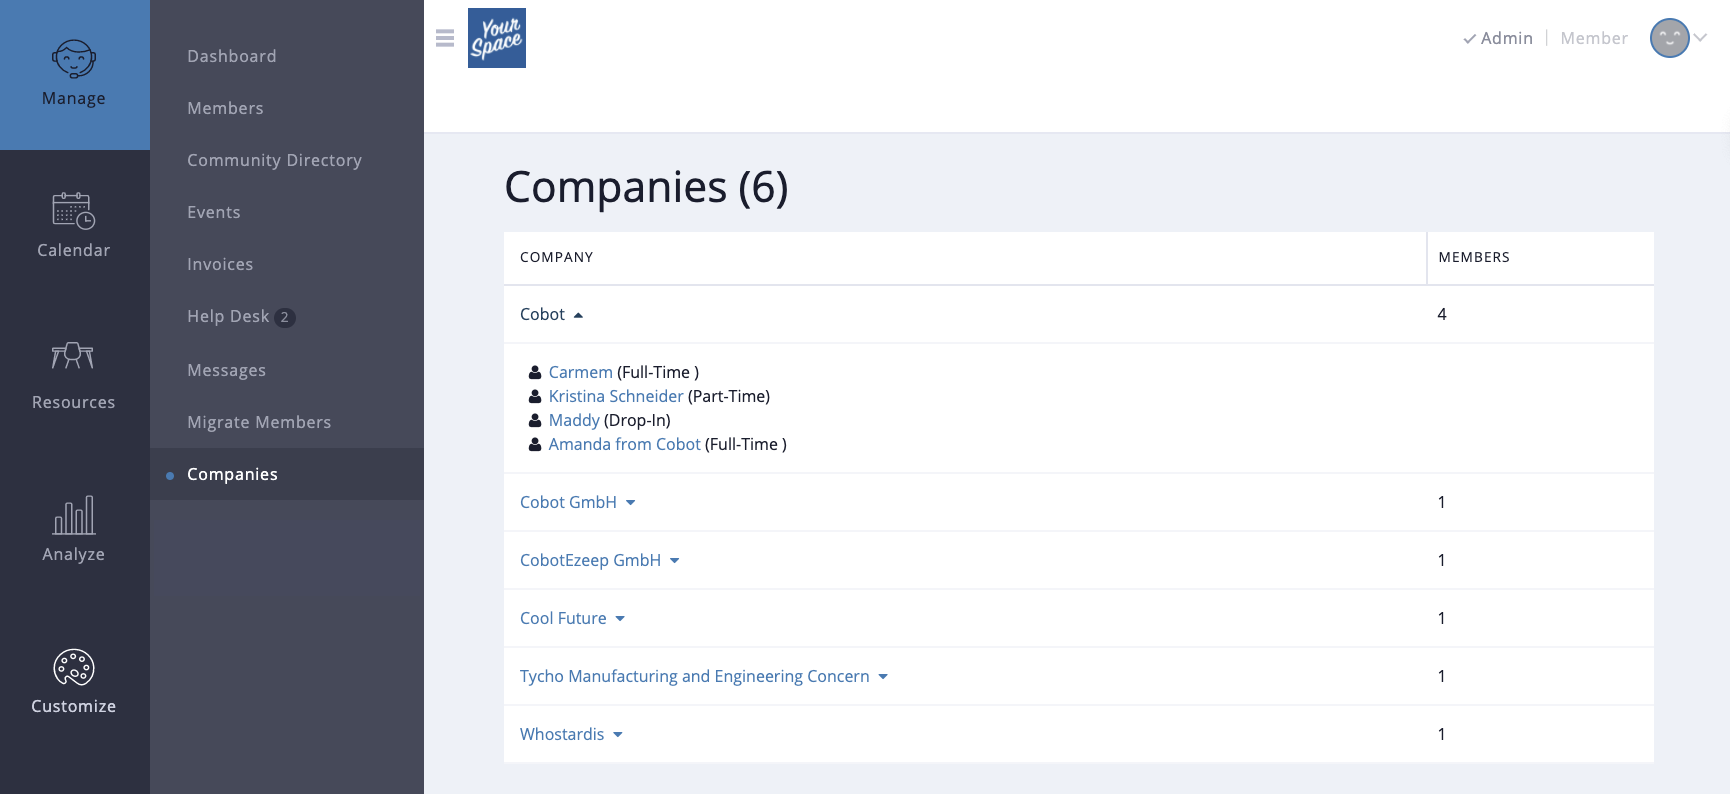 Keeping track of companies and the members that are part of them is helpful if you have nested team payments. Give your admins an overview with the Companies Add-on.